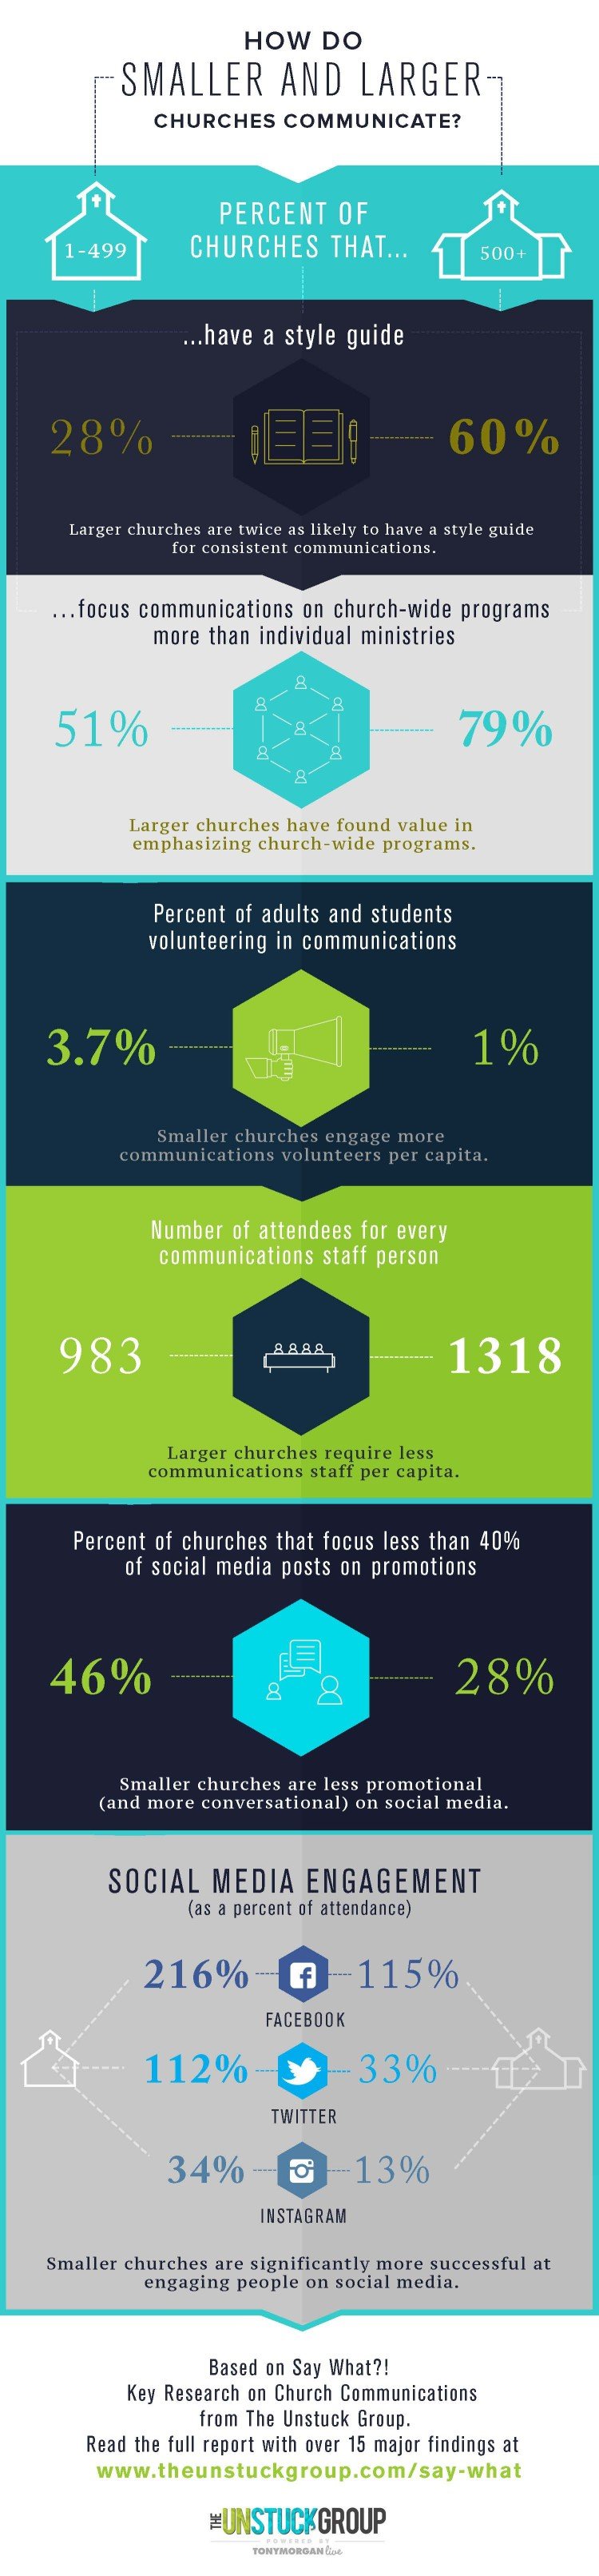 KEY DIFFERENCES BETWEEN HOW LARGER AND SMALLER CHURCHES COMMUNICATE